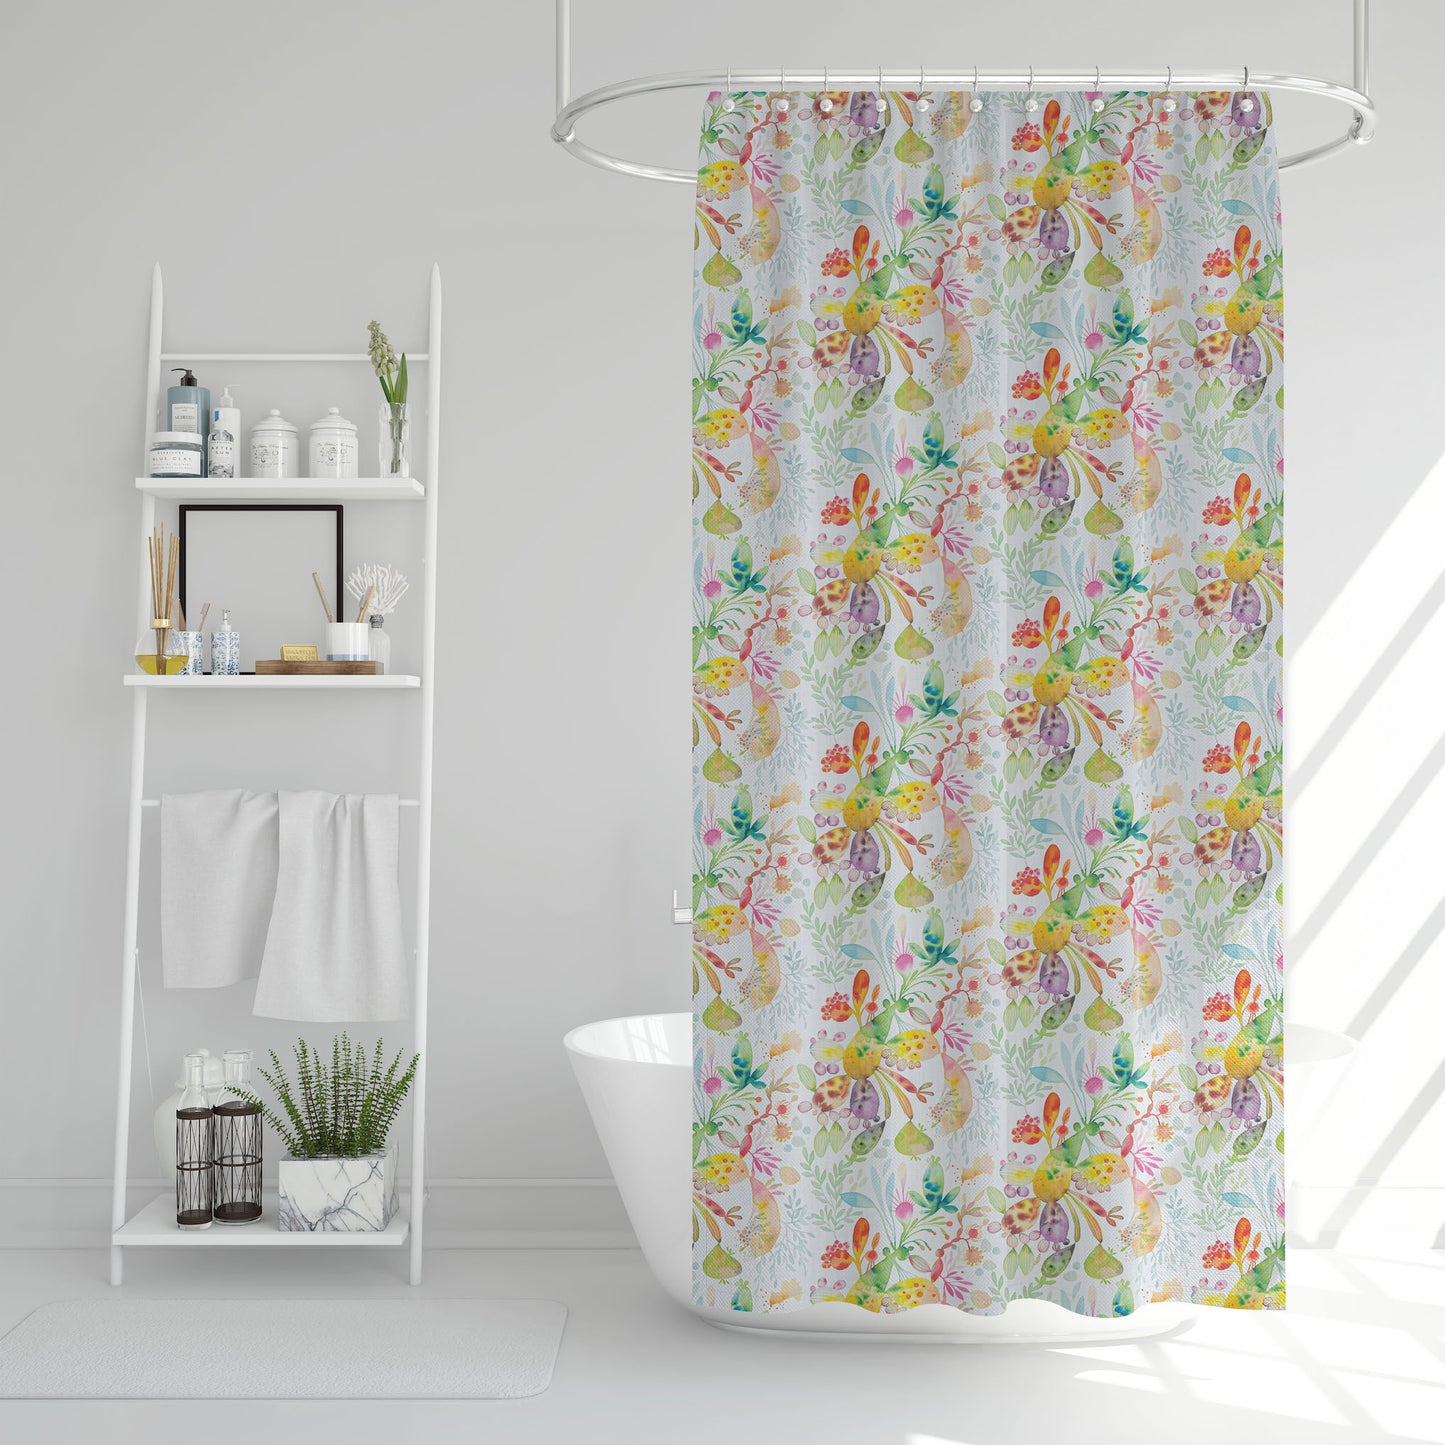 Shower Curtain in Kowtow Multi-Color Bright Abstract Watercolor- Blue, Green, Yellow, Pink